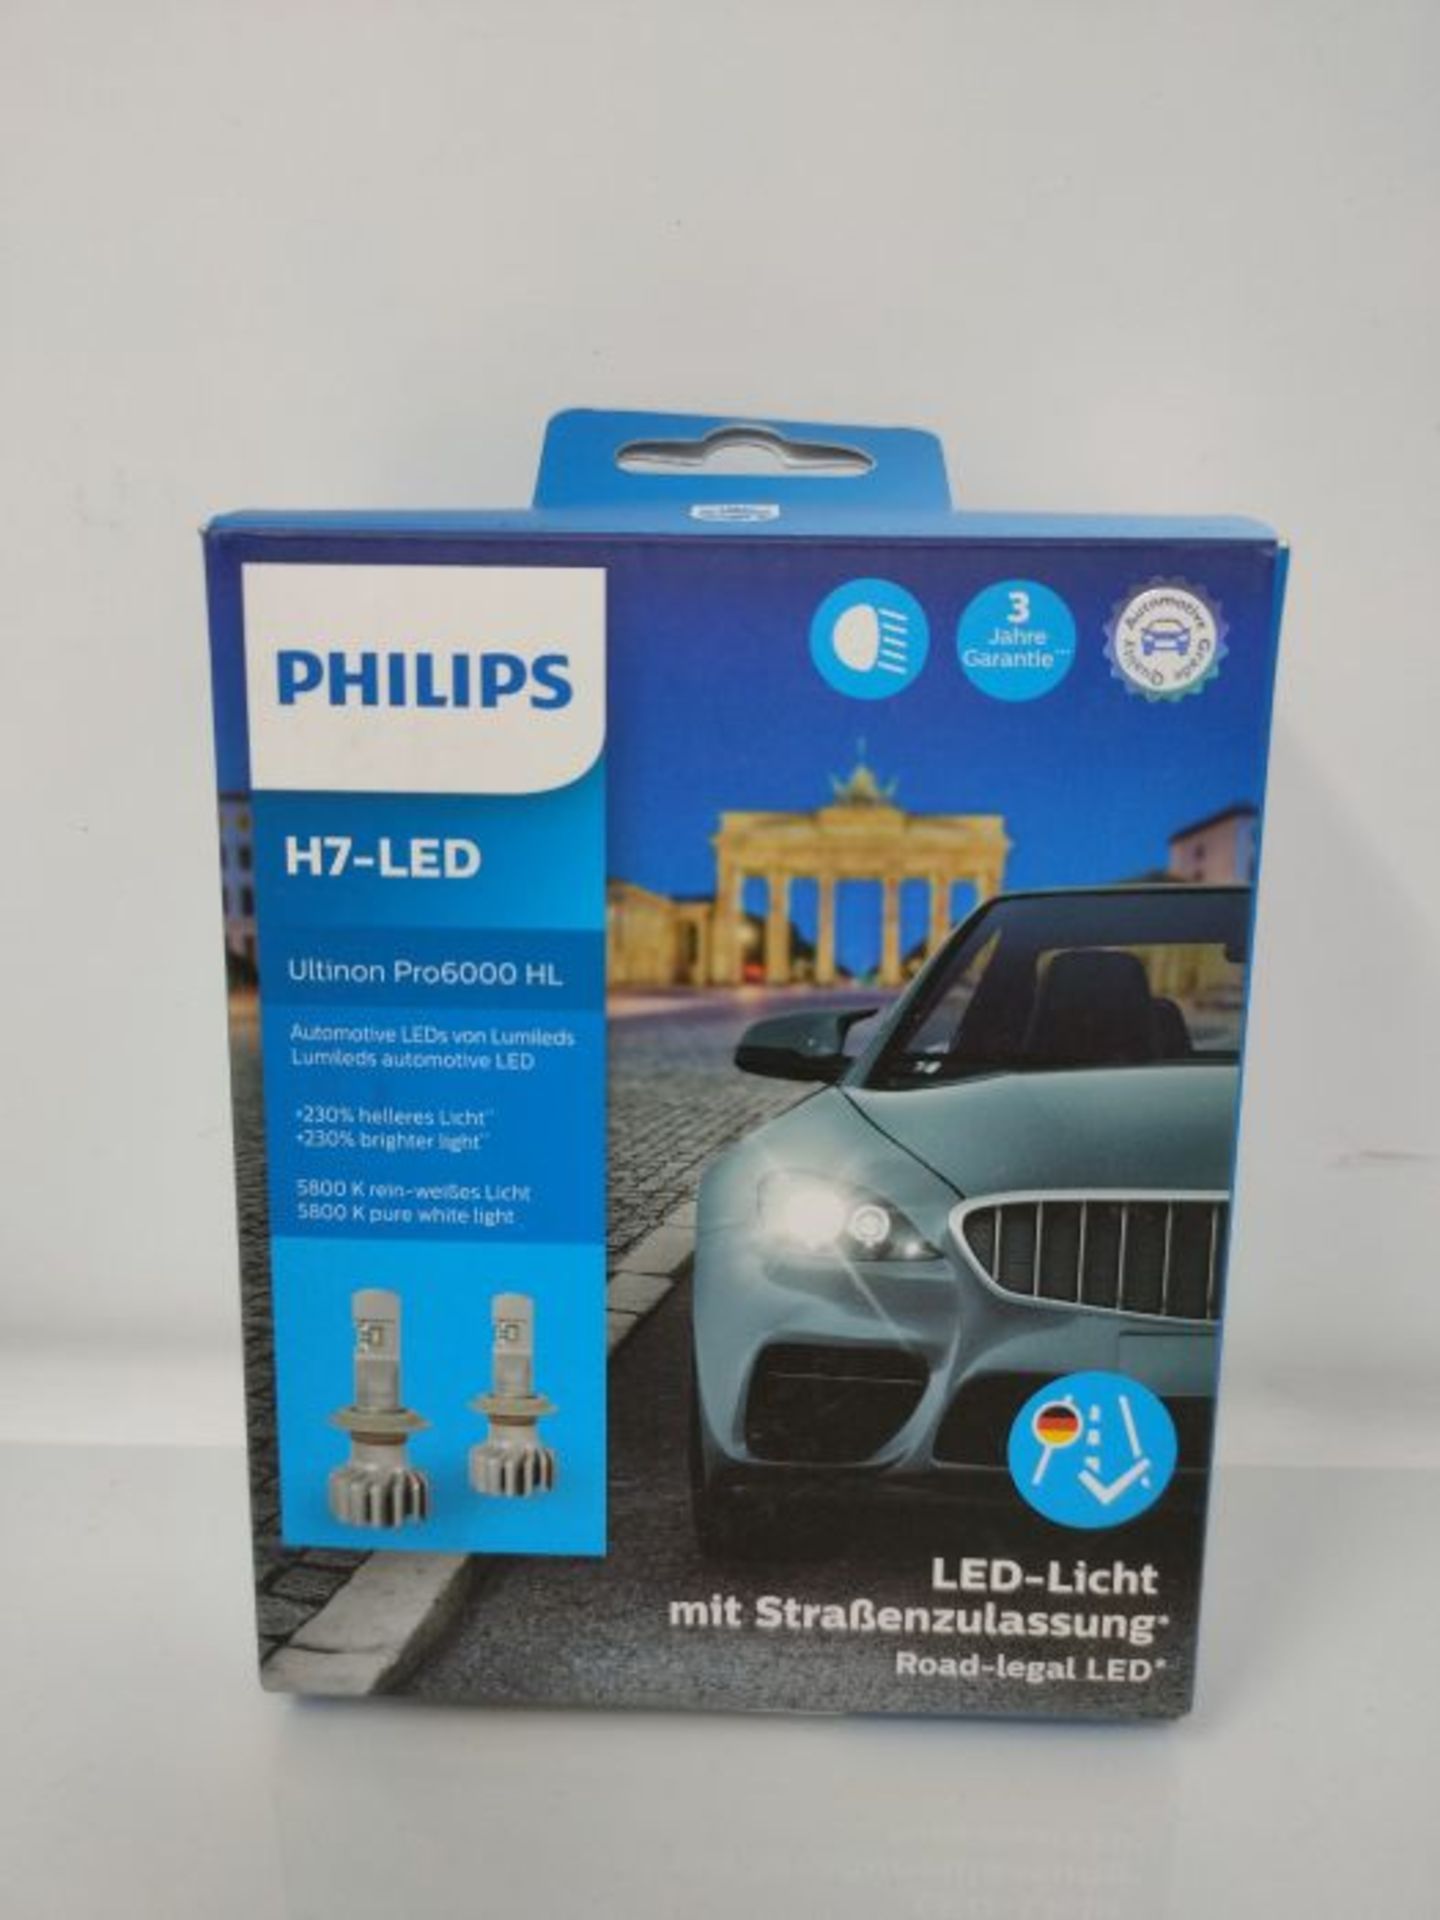 RRP £110.00 Philips Ultinon Pro6000 H7-LED Scheinwerferlampe mit Stra?enzulassung, +230% helleres - Image 2 of 3